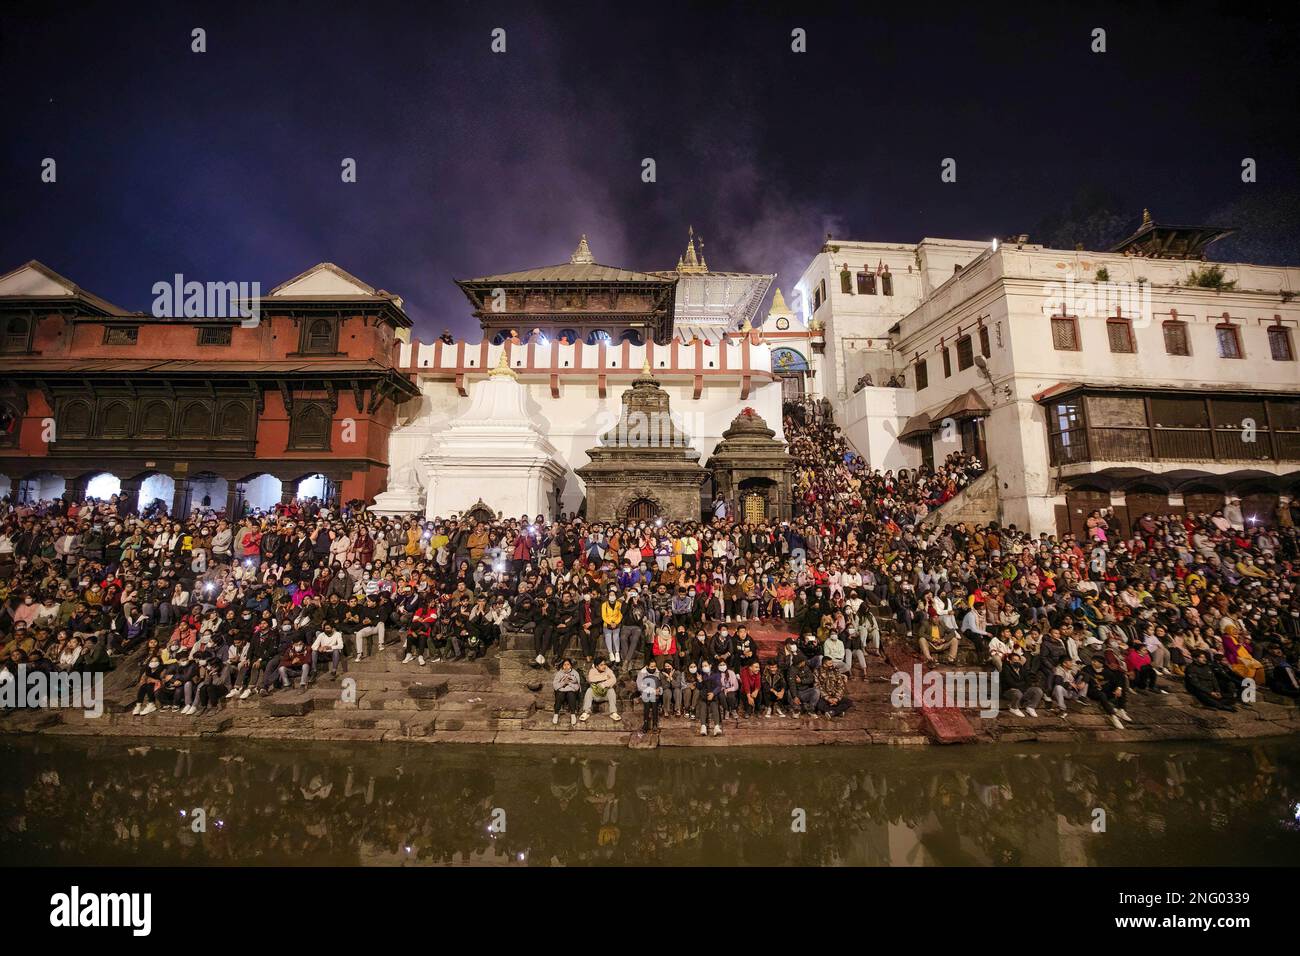 Kathmandu, Nepal. 17th Feb, 2023. Hindu devotees gather to observe the religious rituals and dance on the eve of the Maha Shivaratri festival at the premises of Pashupatinath Temple. Hindu Devotees from Nepal and India come to this temple to take part in the Shivaratri festival which is one of the biggest Hindu festivals dedicated to Lord Shiva and celebrated by devotees all over the world. (Photo by Prabin Ranabhat/SOPA Images/Sipa USA) Credit: Sipa USA/Alamy Live News Stock Photo